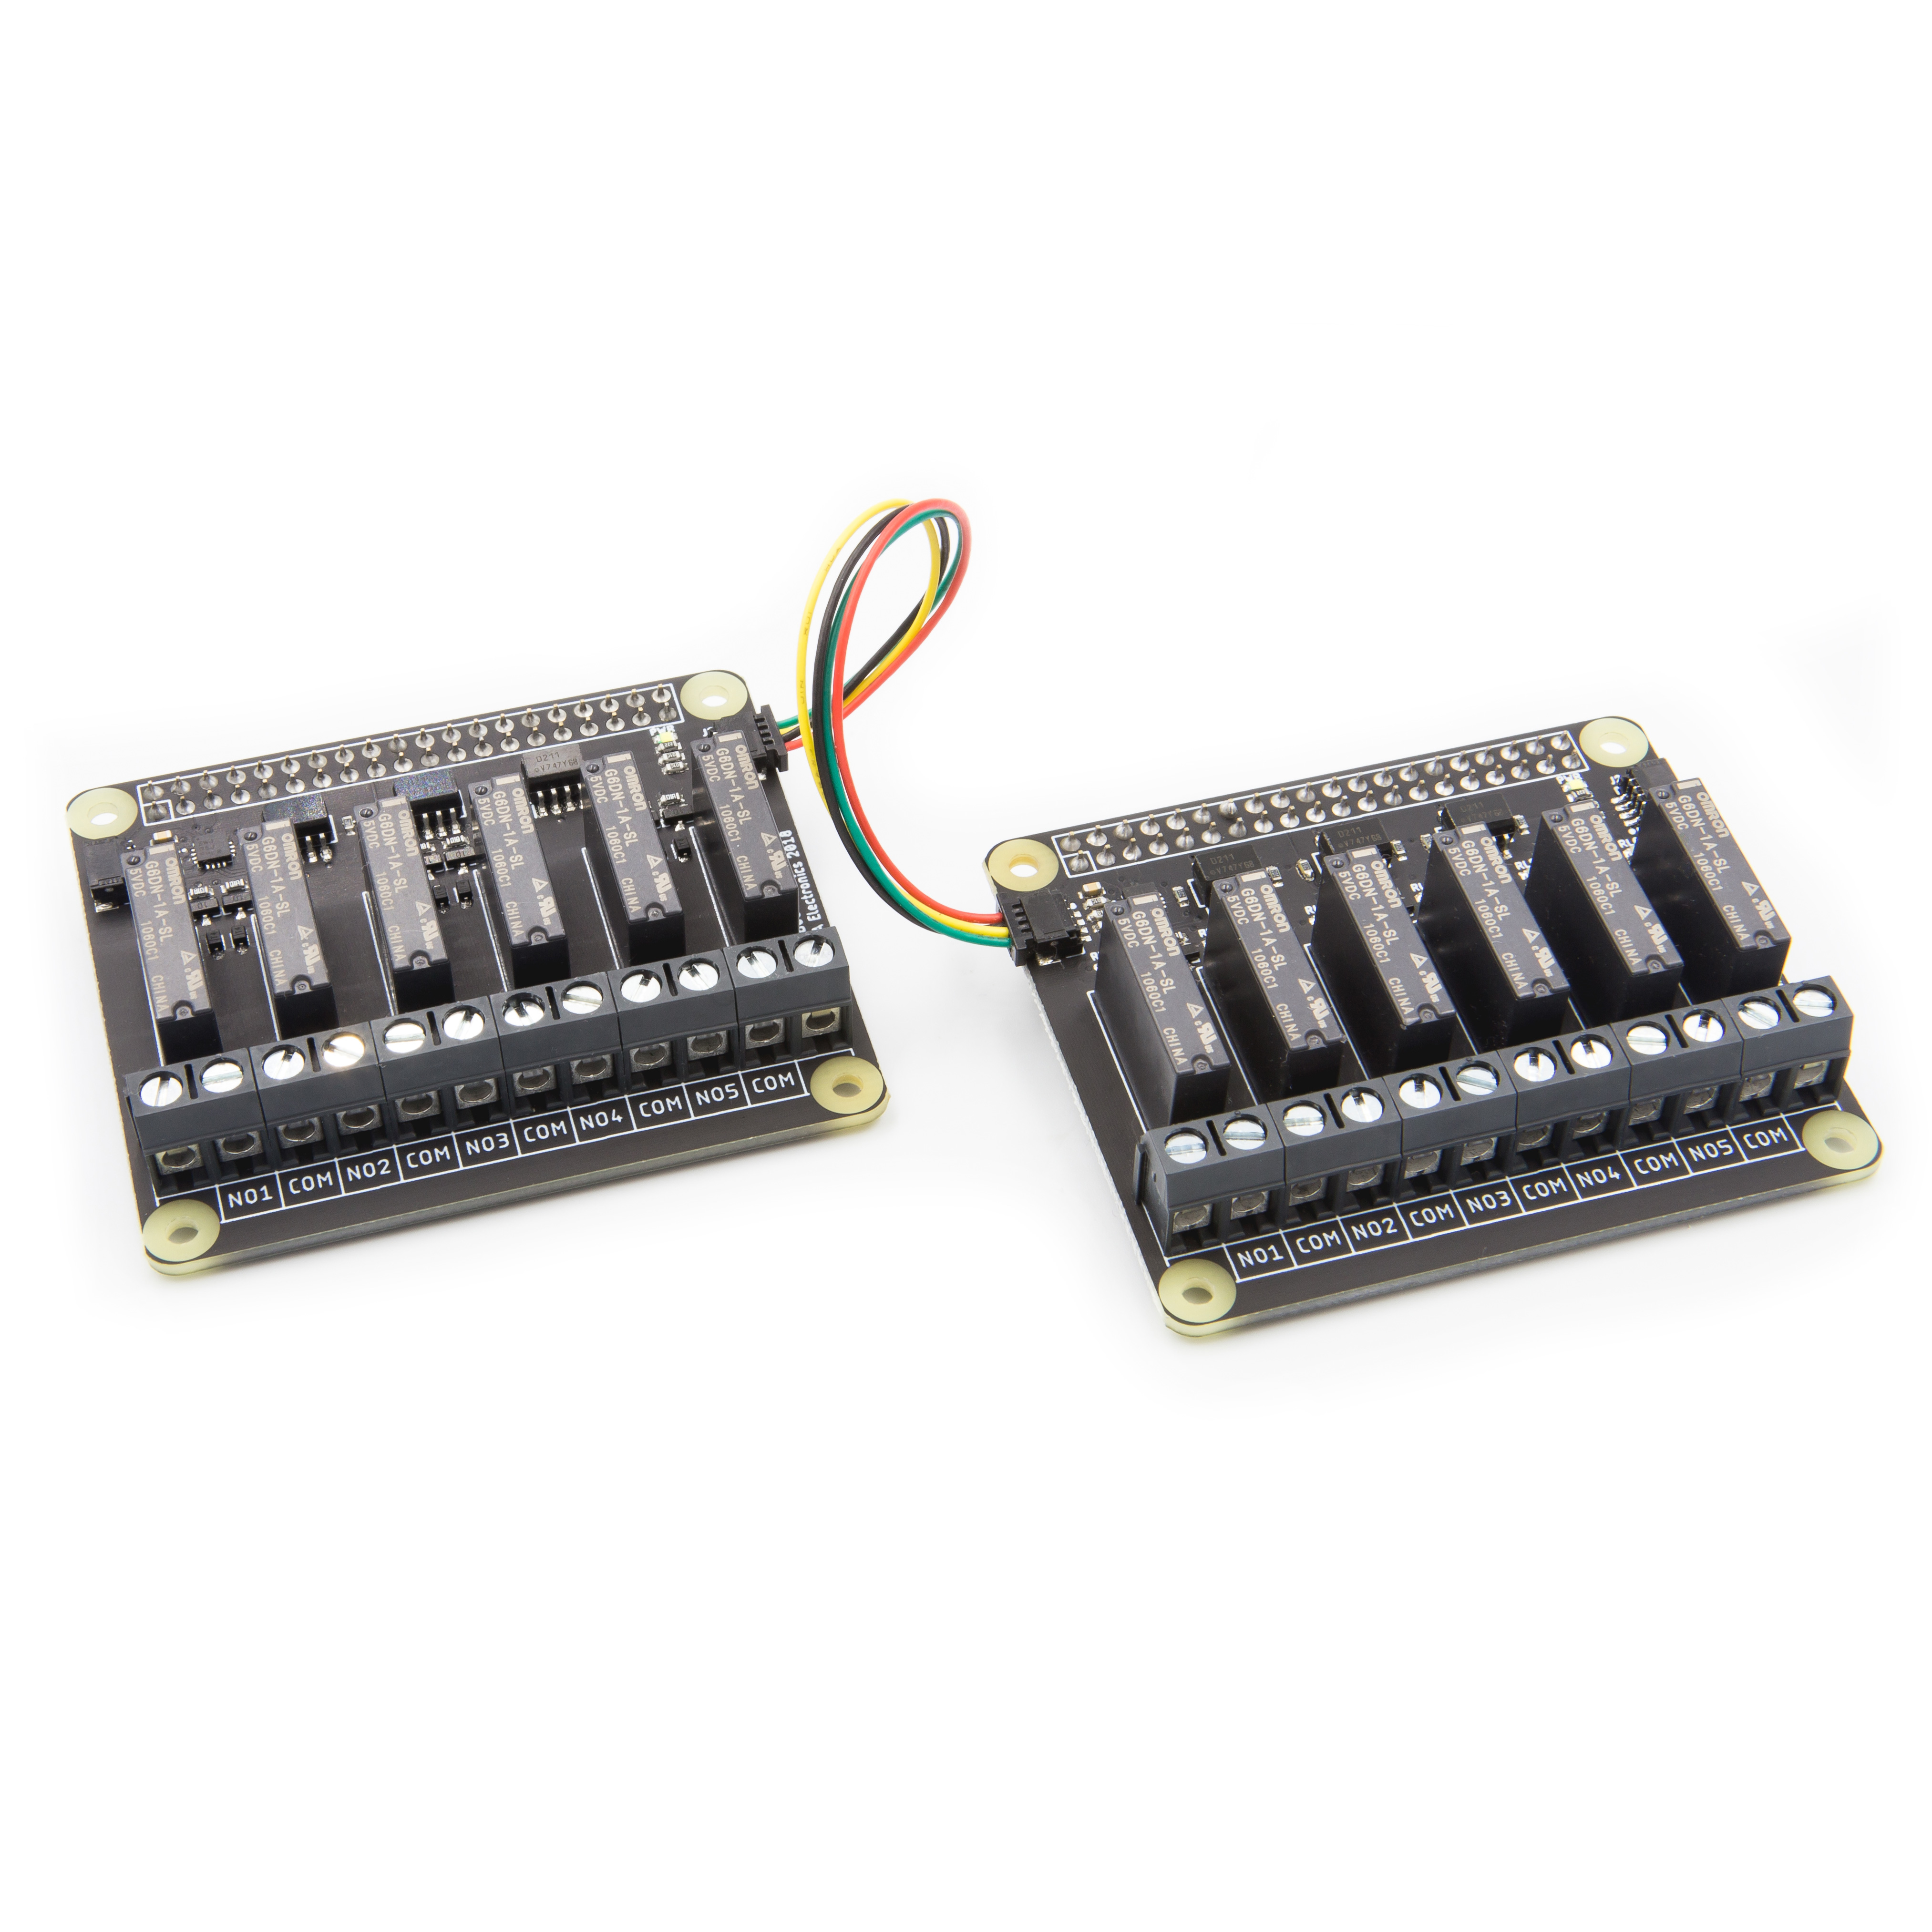 6ch Relay Board for Raspberry Pi product image